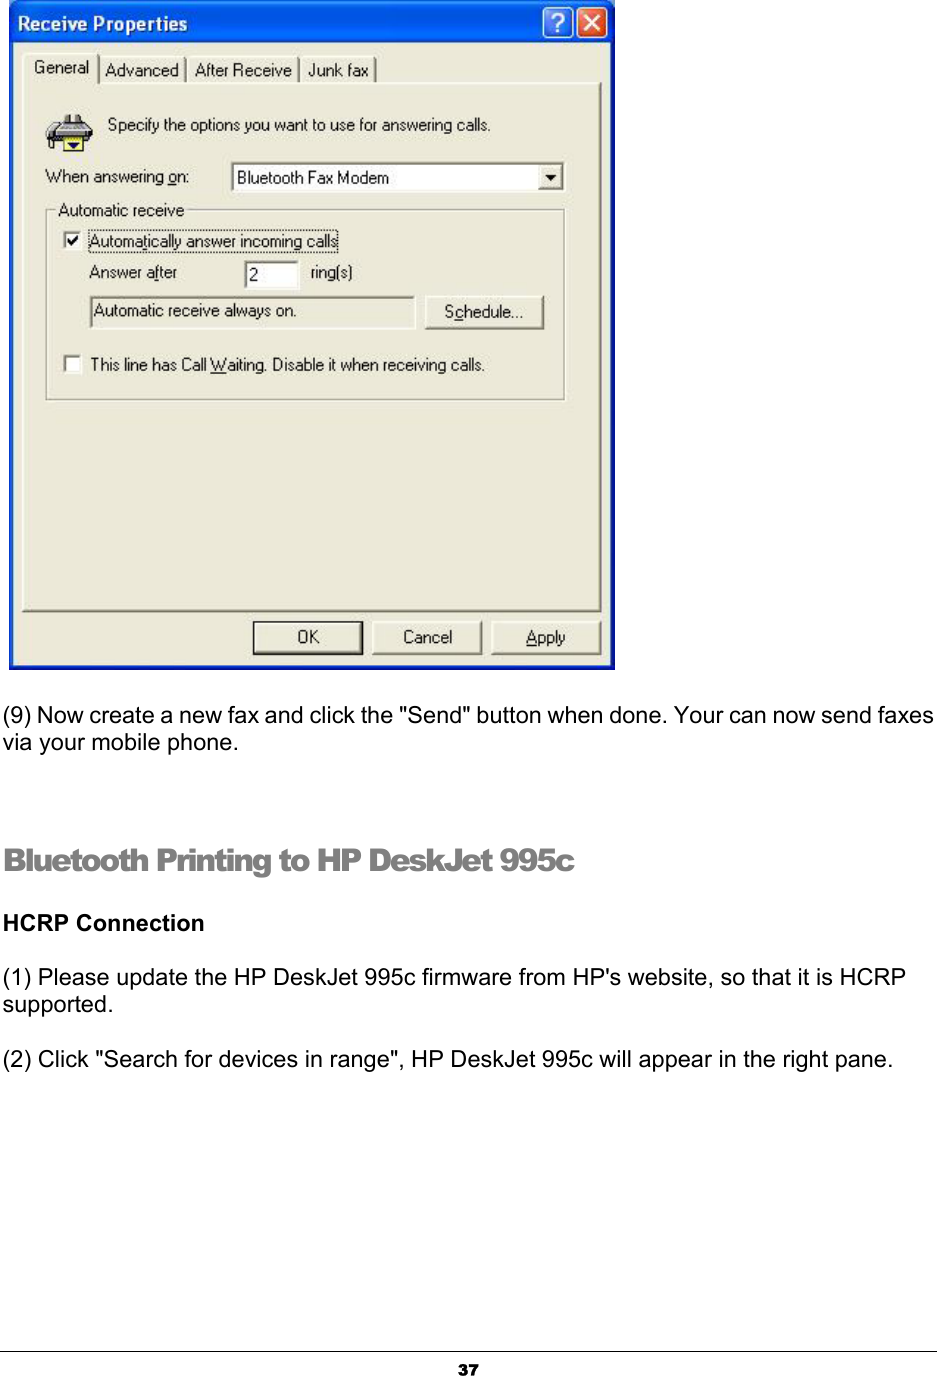  37   (9) Now create a new fax and click the &quot;Send&quot; button when done. Your can now send faxes via your mobile phone.      Bluetooth Printing to HP DeskJet 995c  HCRP Connection  (1) Please update the HP DeskJet 995c firmware from HP&apos;s website, so that it is HCRP supported.  (2) Click &quot;Search for devices in range&quot;, HP DeskJet 995c will appear in the right pane.   